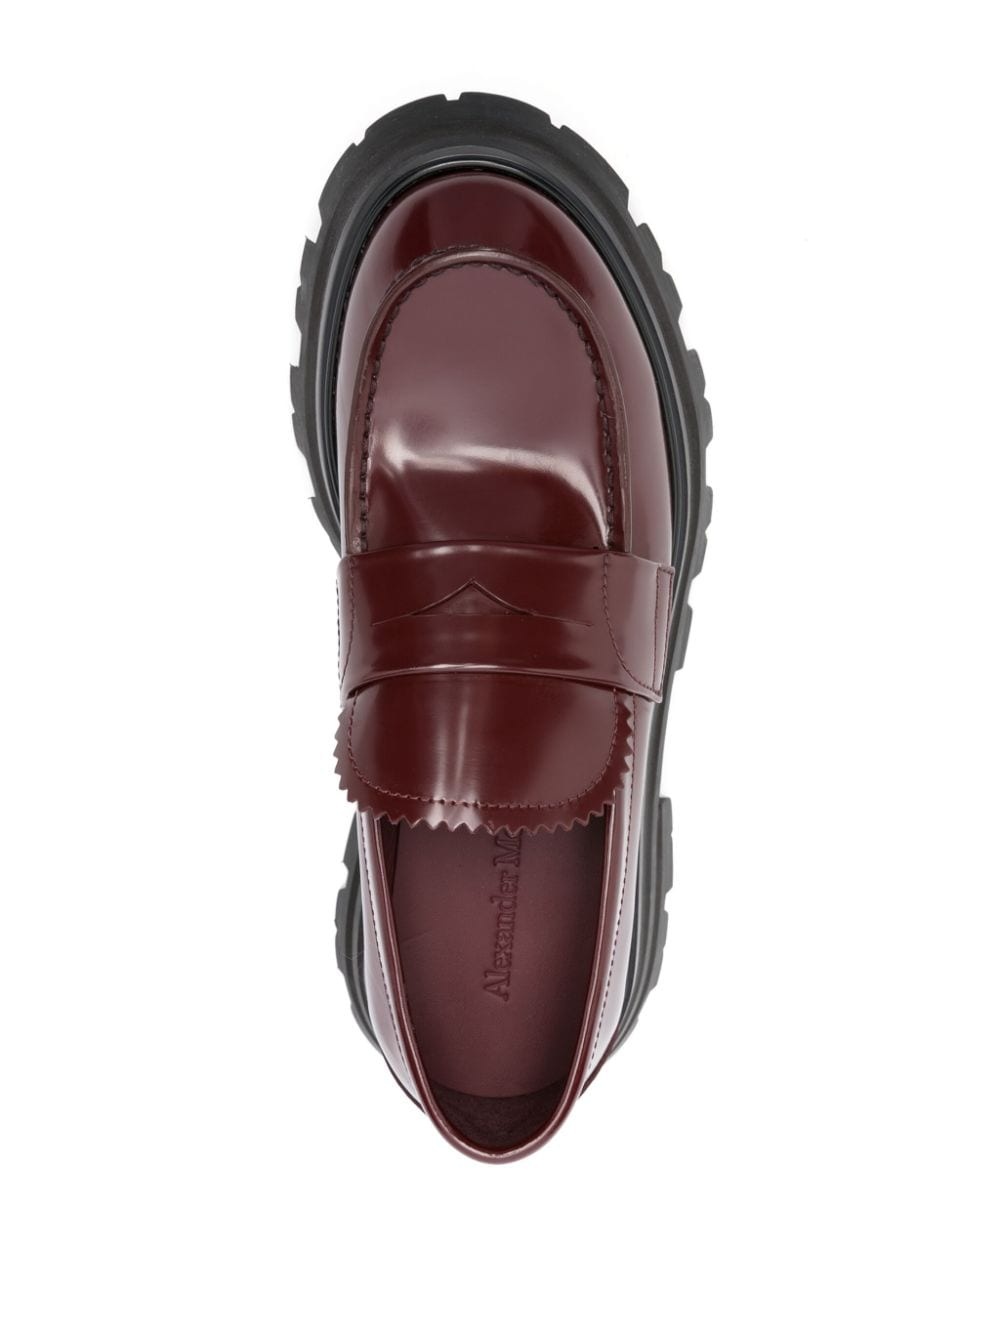 ridged-sole leather loafers - 4